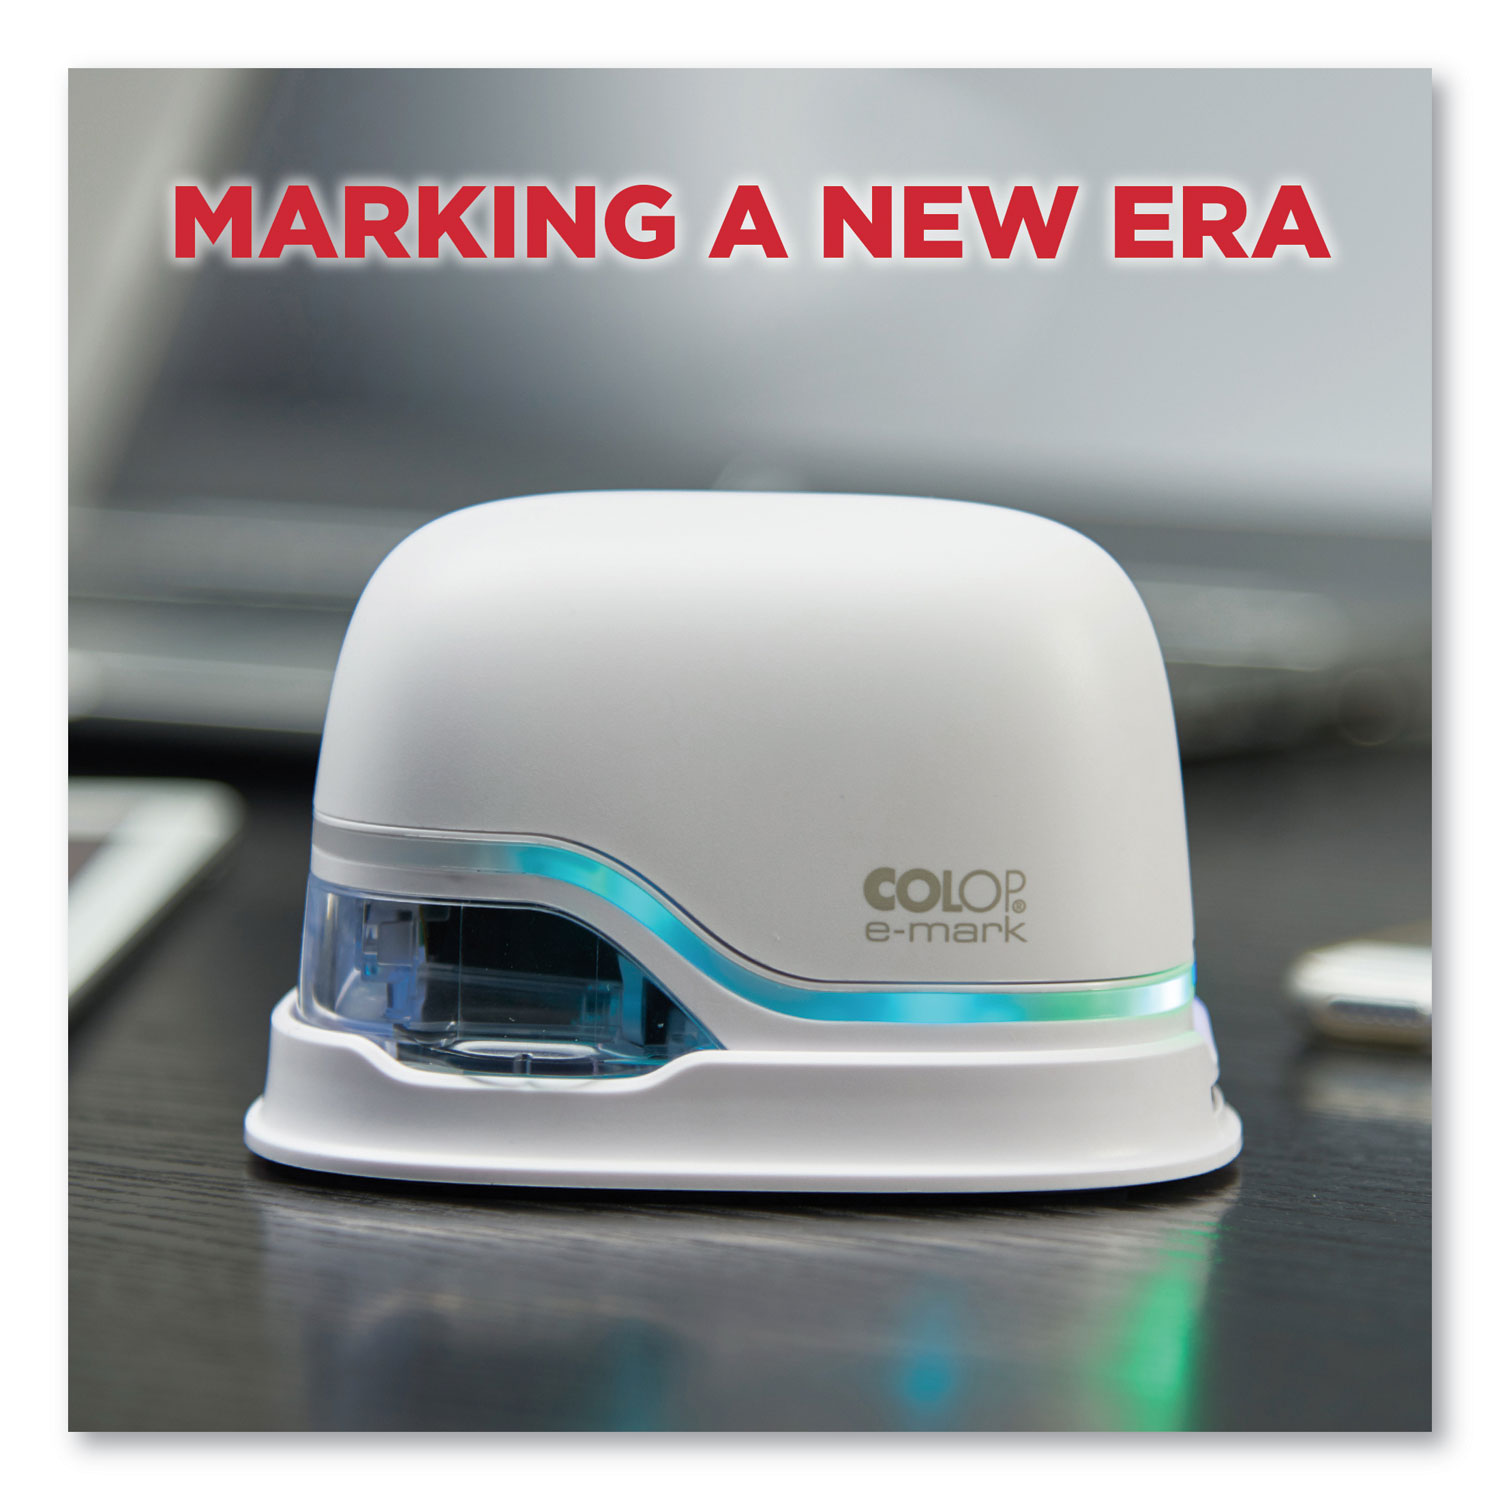  Colop e-mark 039201 Digital Marking Device, Customizable Size and Message with Images, White (COS039201) 